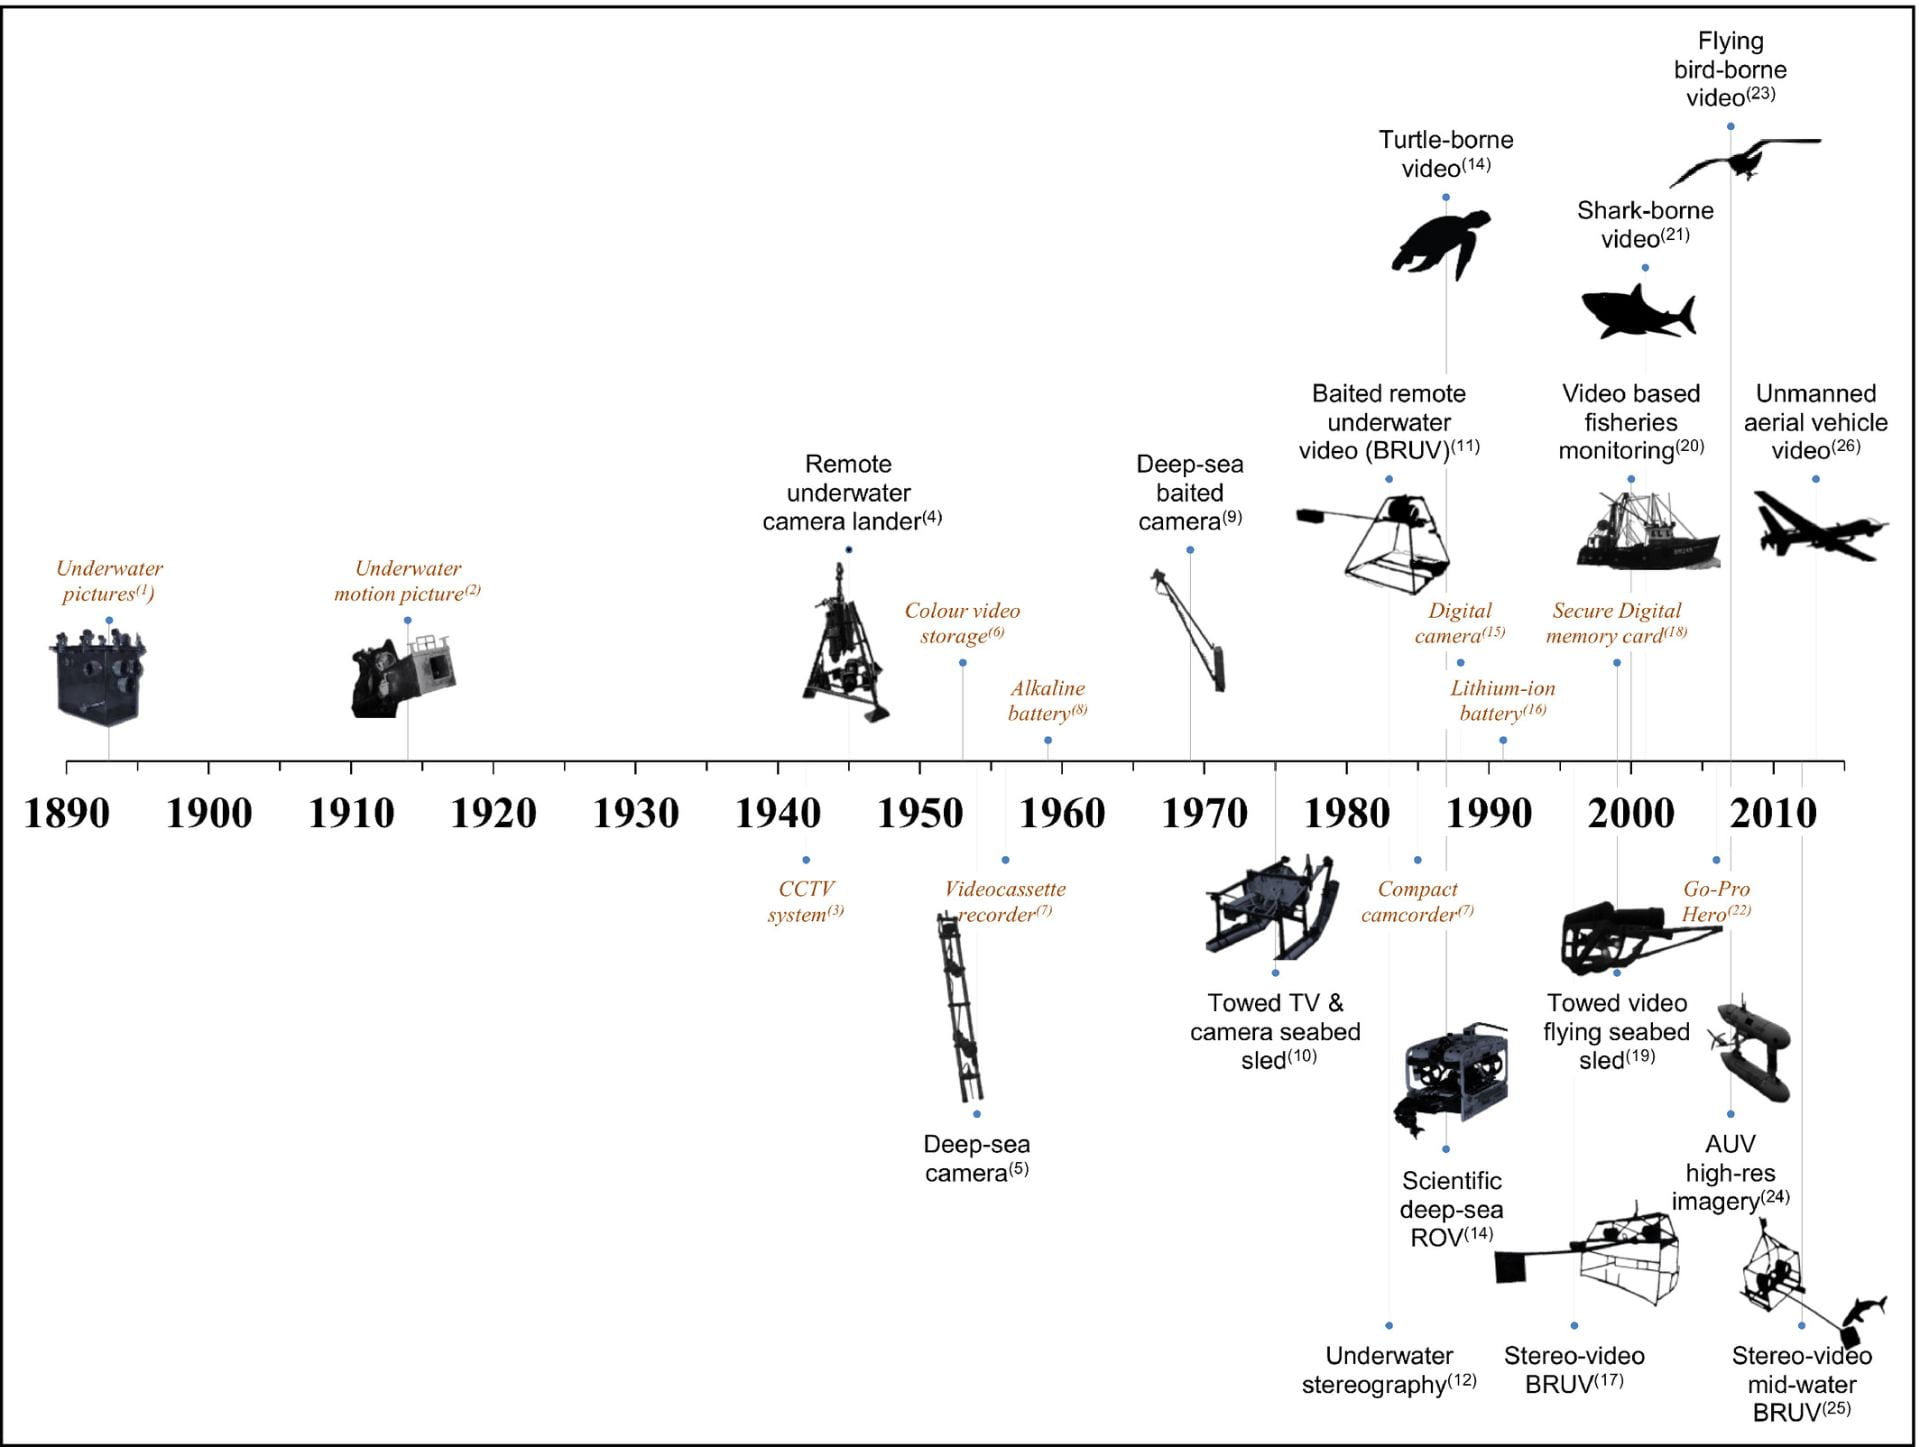 Timeline of camera development from 1890 to 2010. 